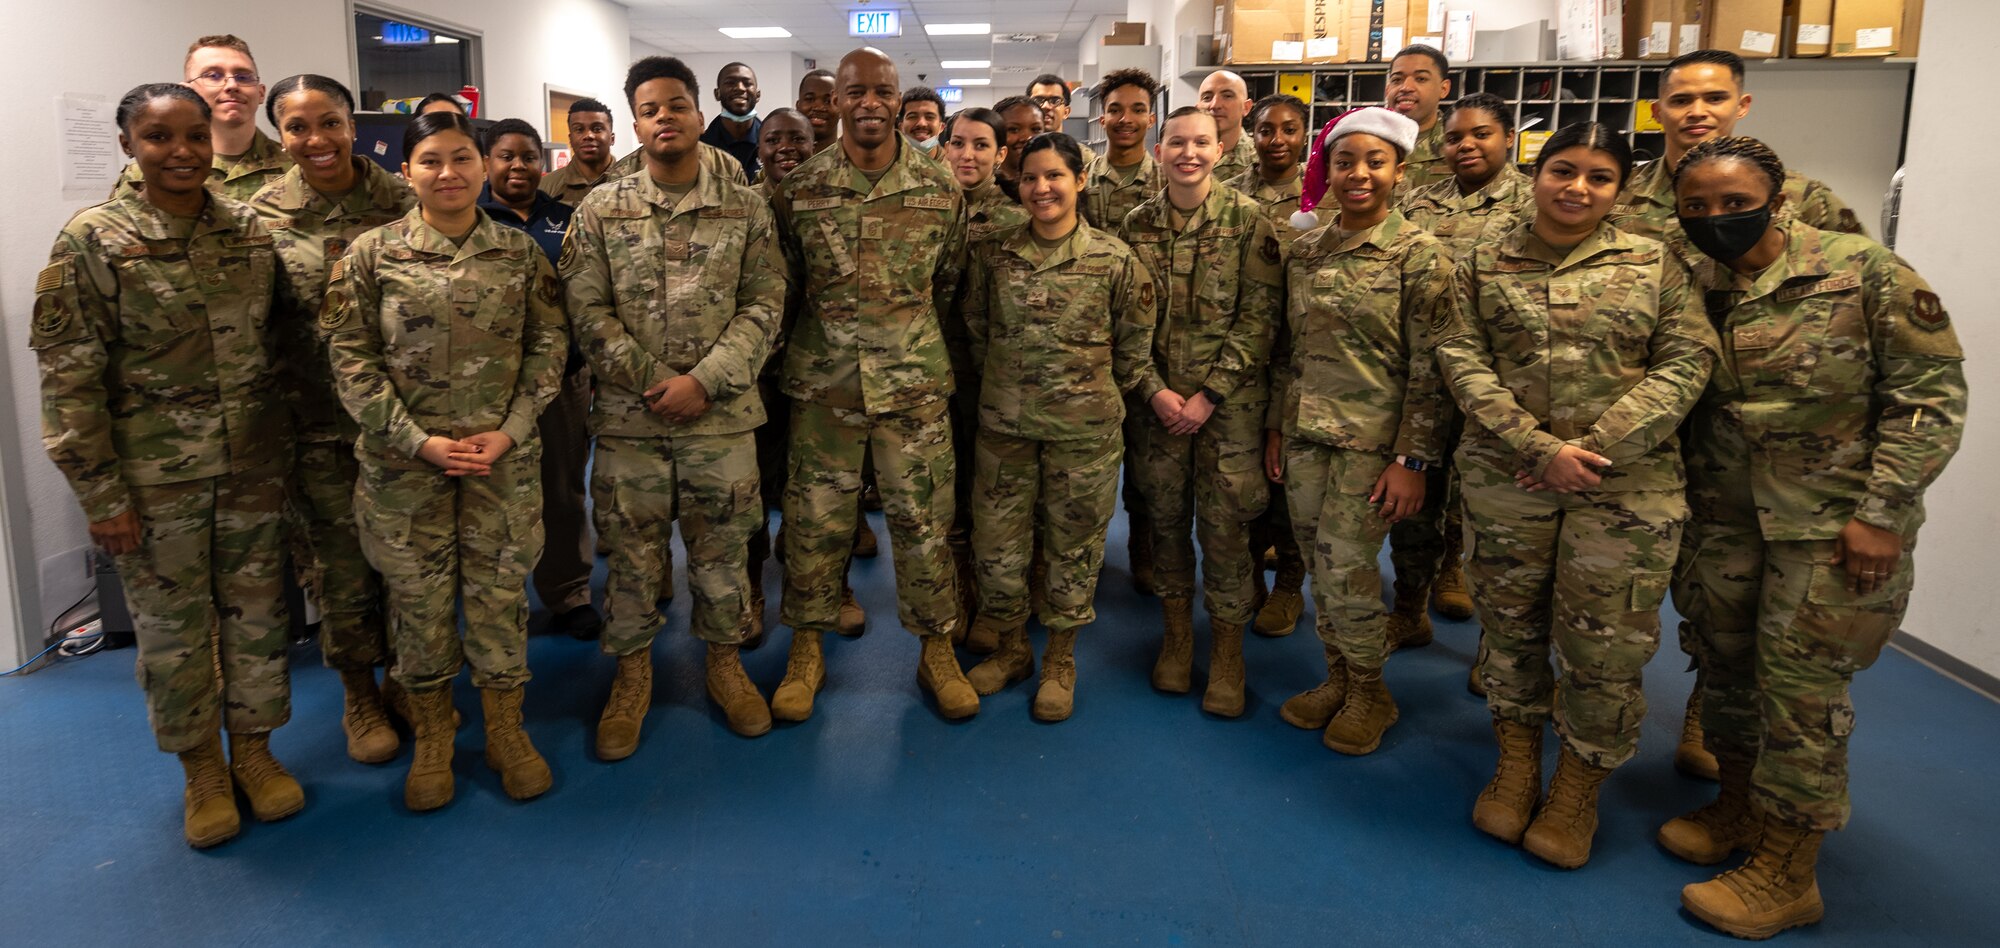 A group of Airmen posing for a photo.